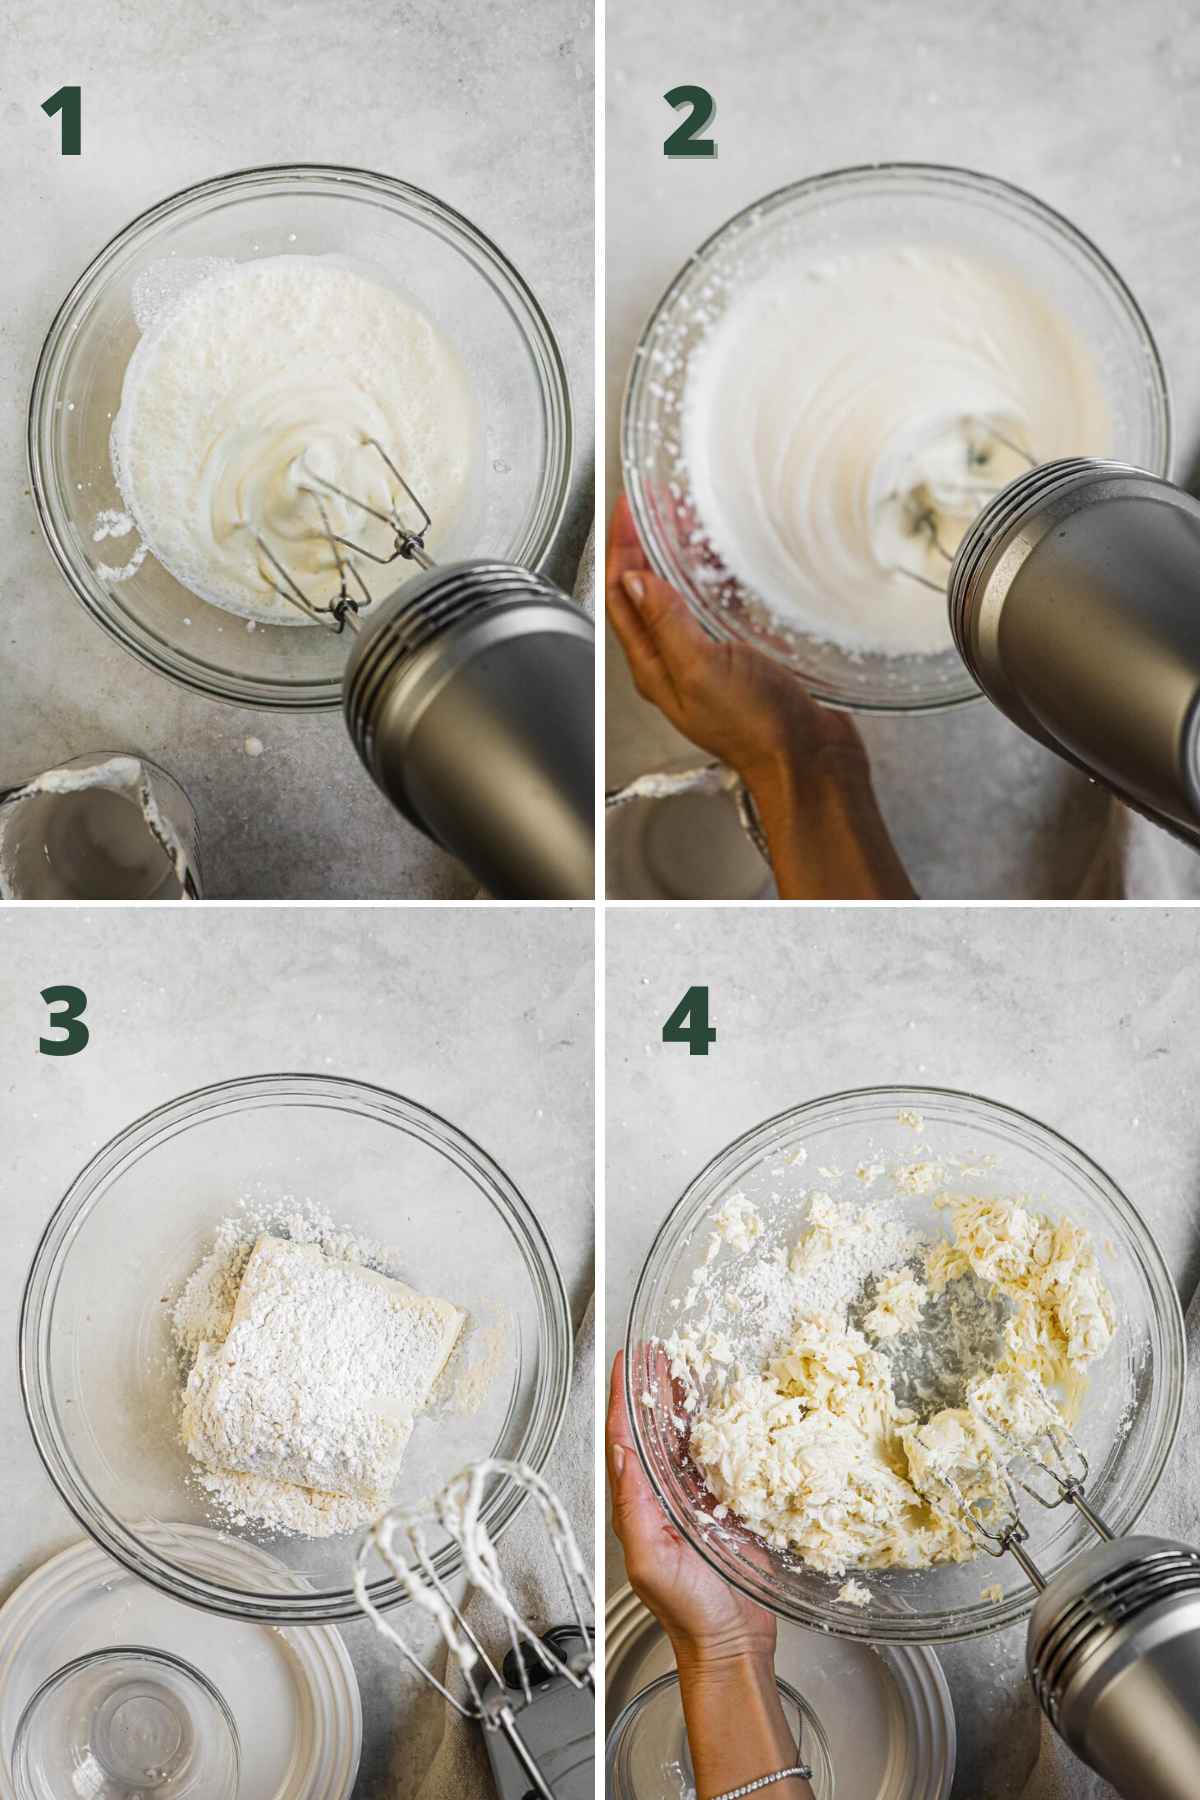 Steps to make 3-ingredient no bake cheesecake, whisk heavy whipping cream and set aside, whisk cream cheese and powdered sugar until fluffy.